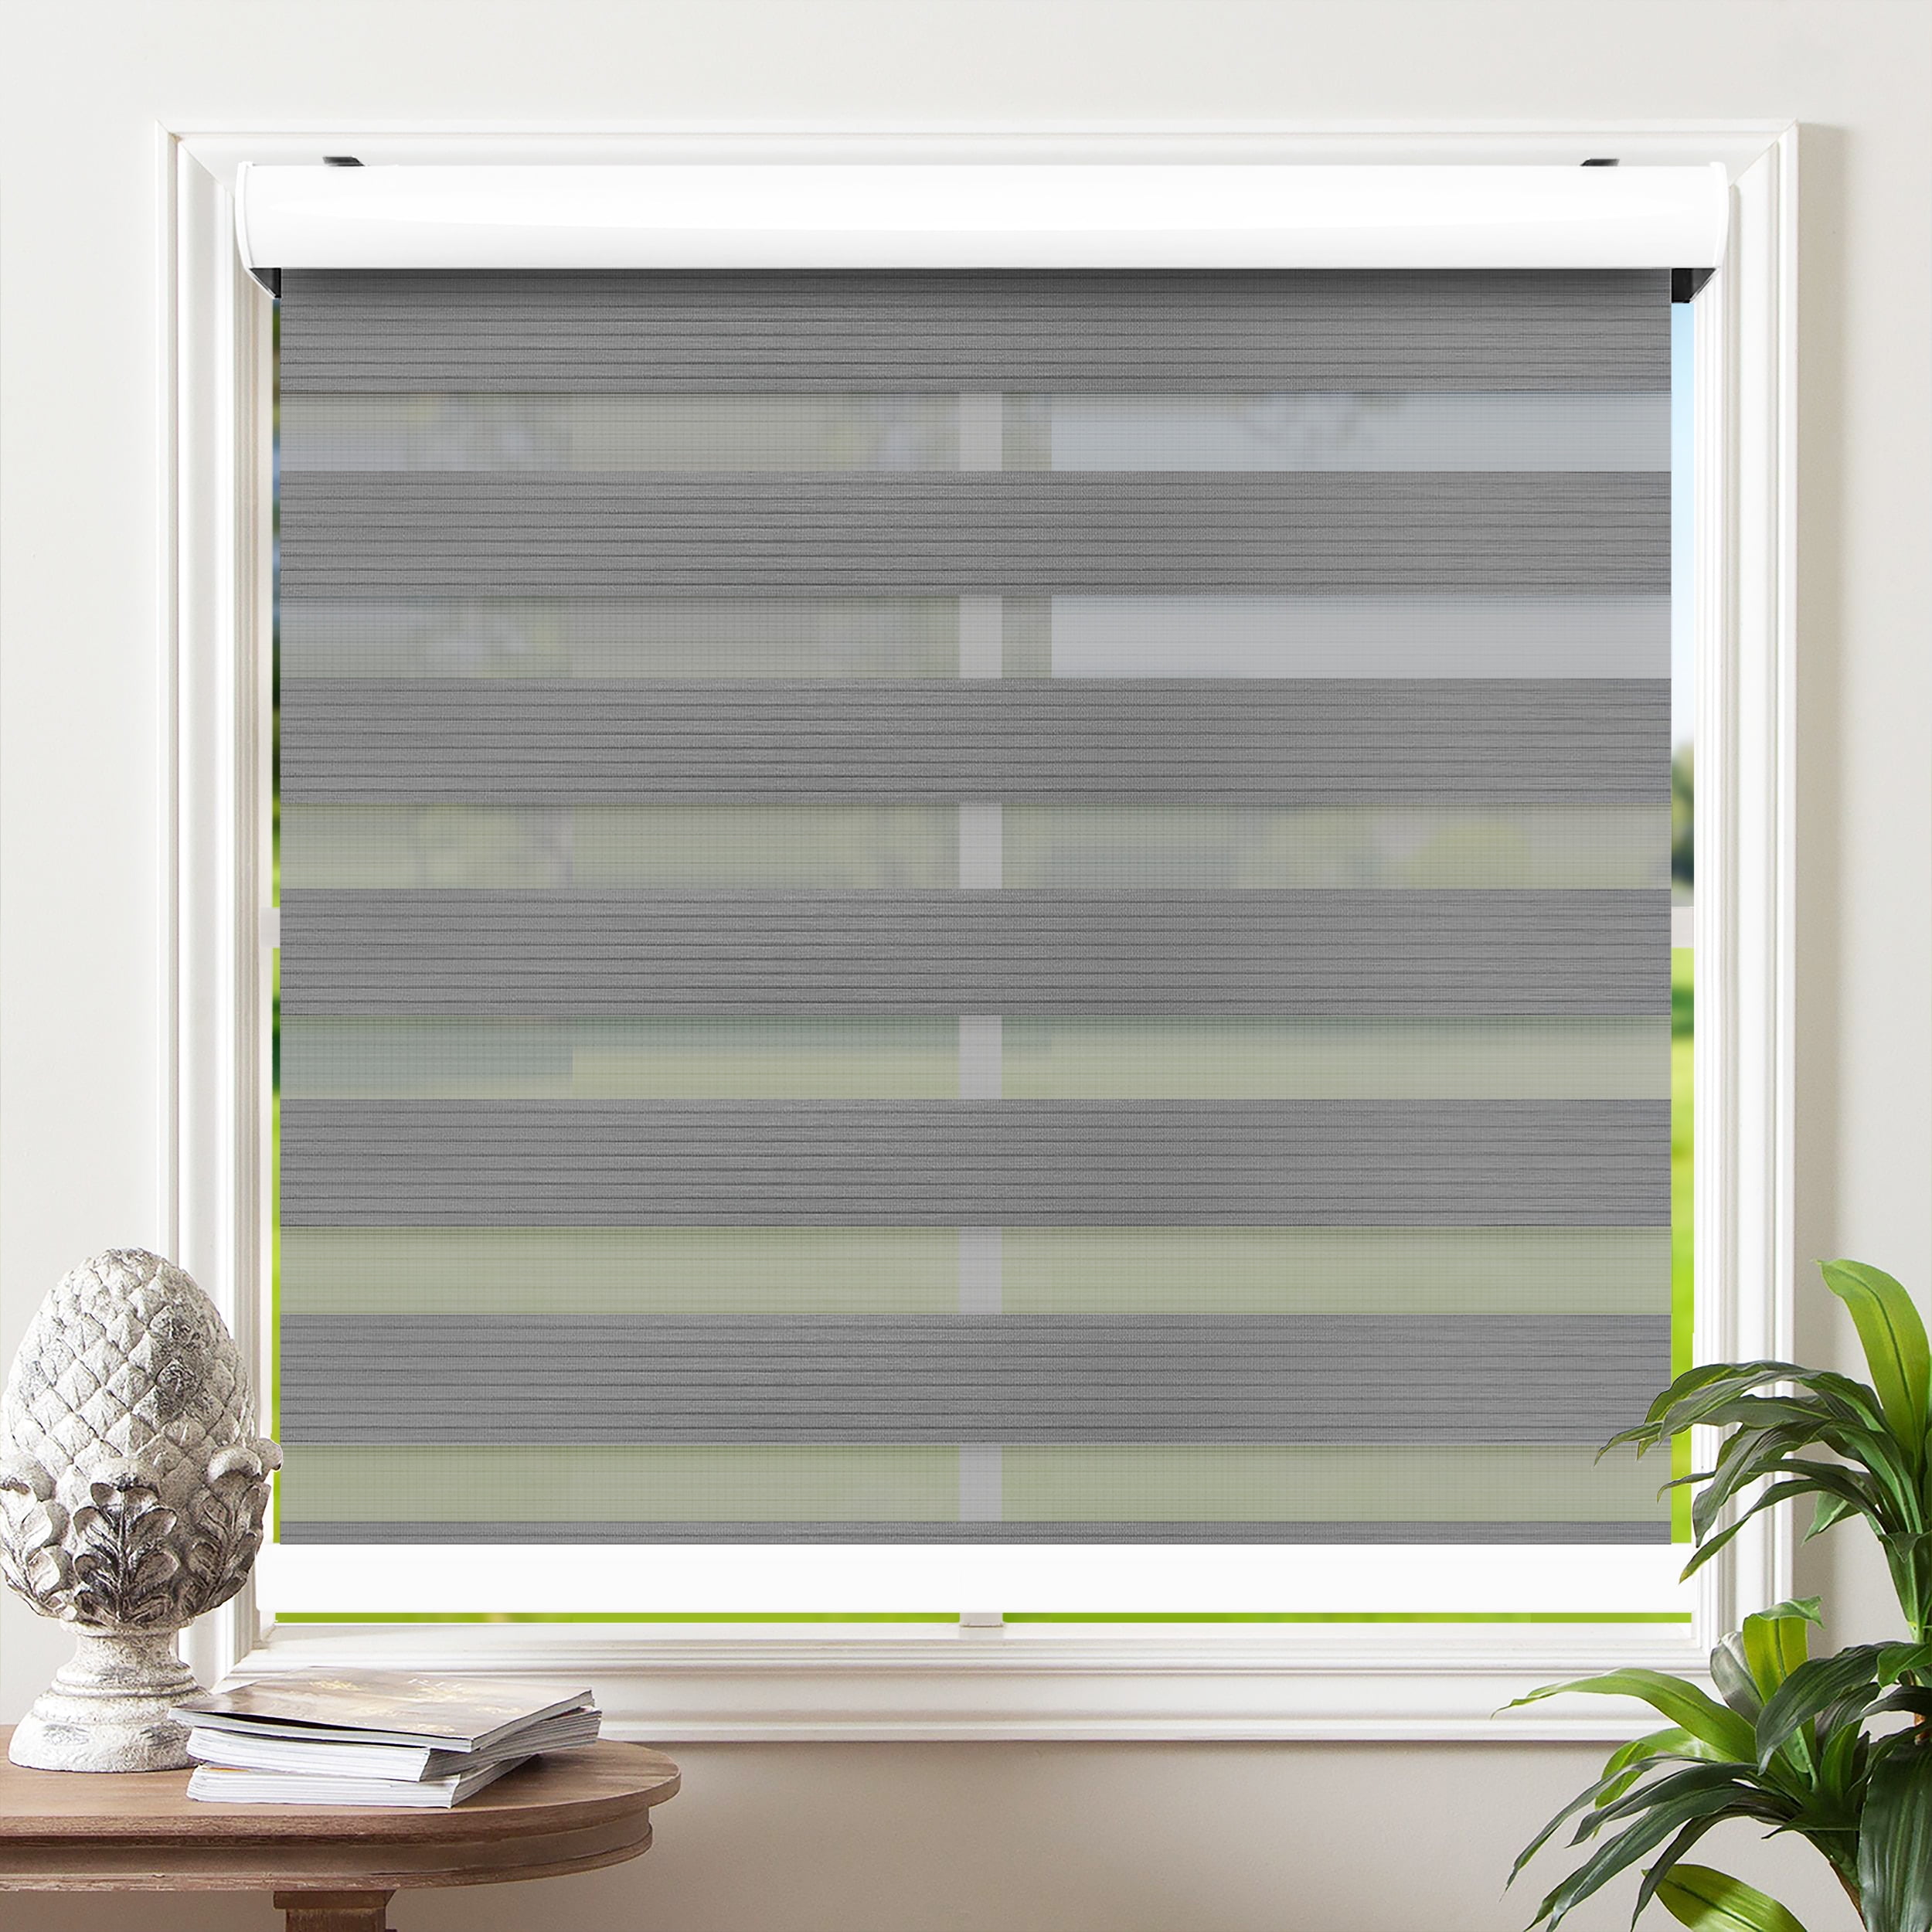 Sheer or Privacy 61"W X 72"H Cordless Zebra Roller Blinds Sheer Shades White 